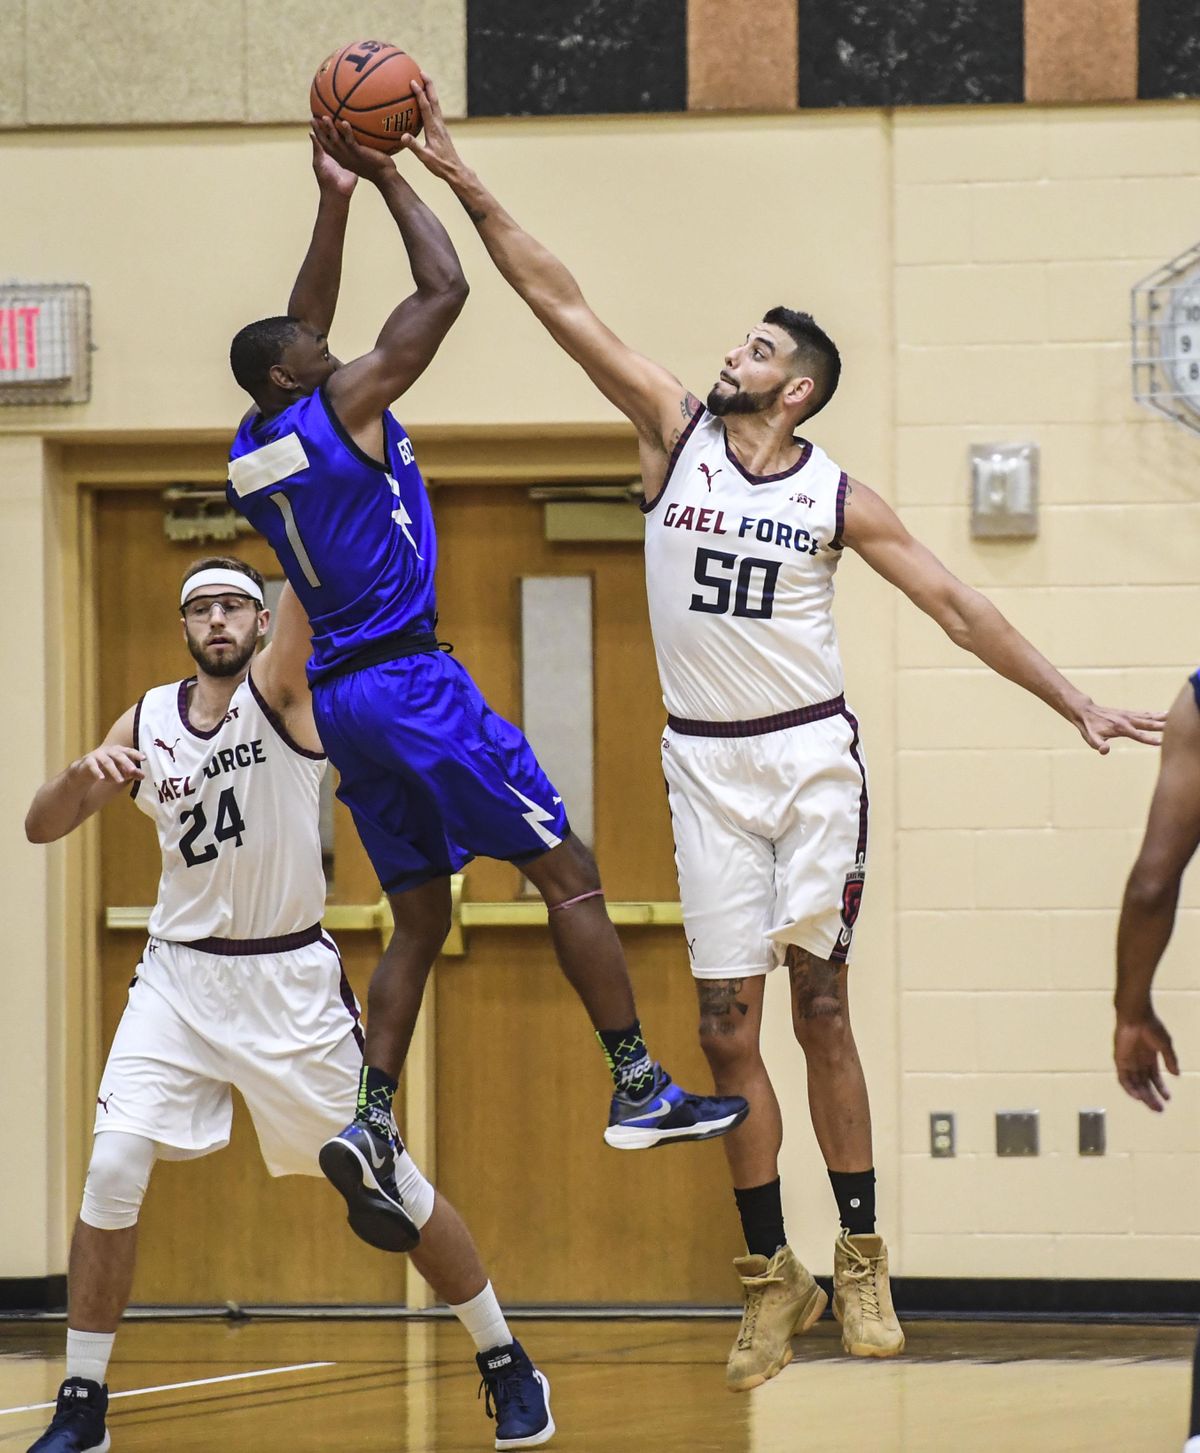 Gael Force center Omar Samhan (50) blocks a shot by Air Force Bomb Squad guard CJ Siples in the first quarter, Friday, June 29, 2018 at Lewis and Clark High School as part of The Basketball Tournament. Calvin Hermanson (24) is at left. (Dan Pelle / The Spokesman-Review)